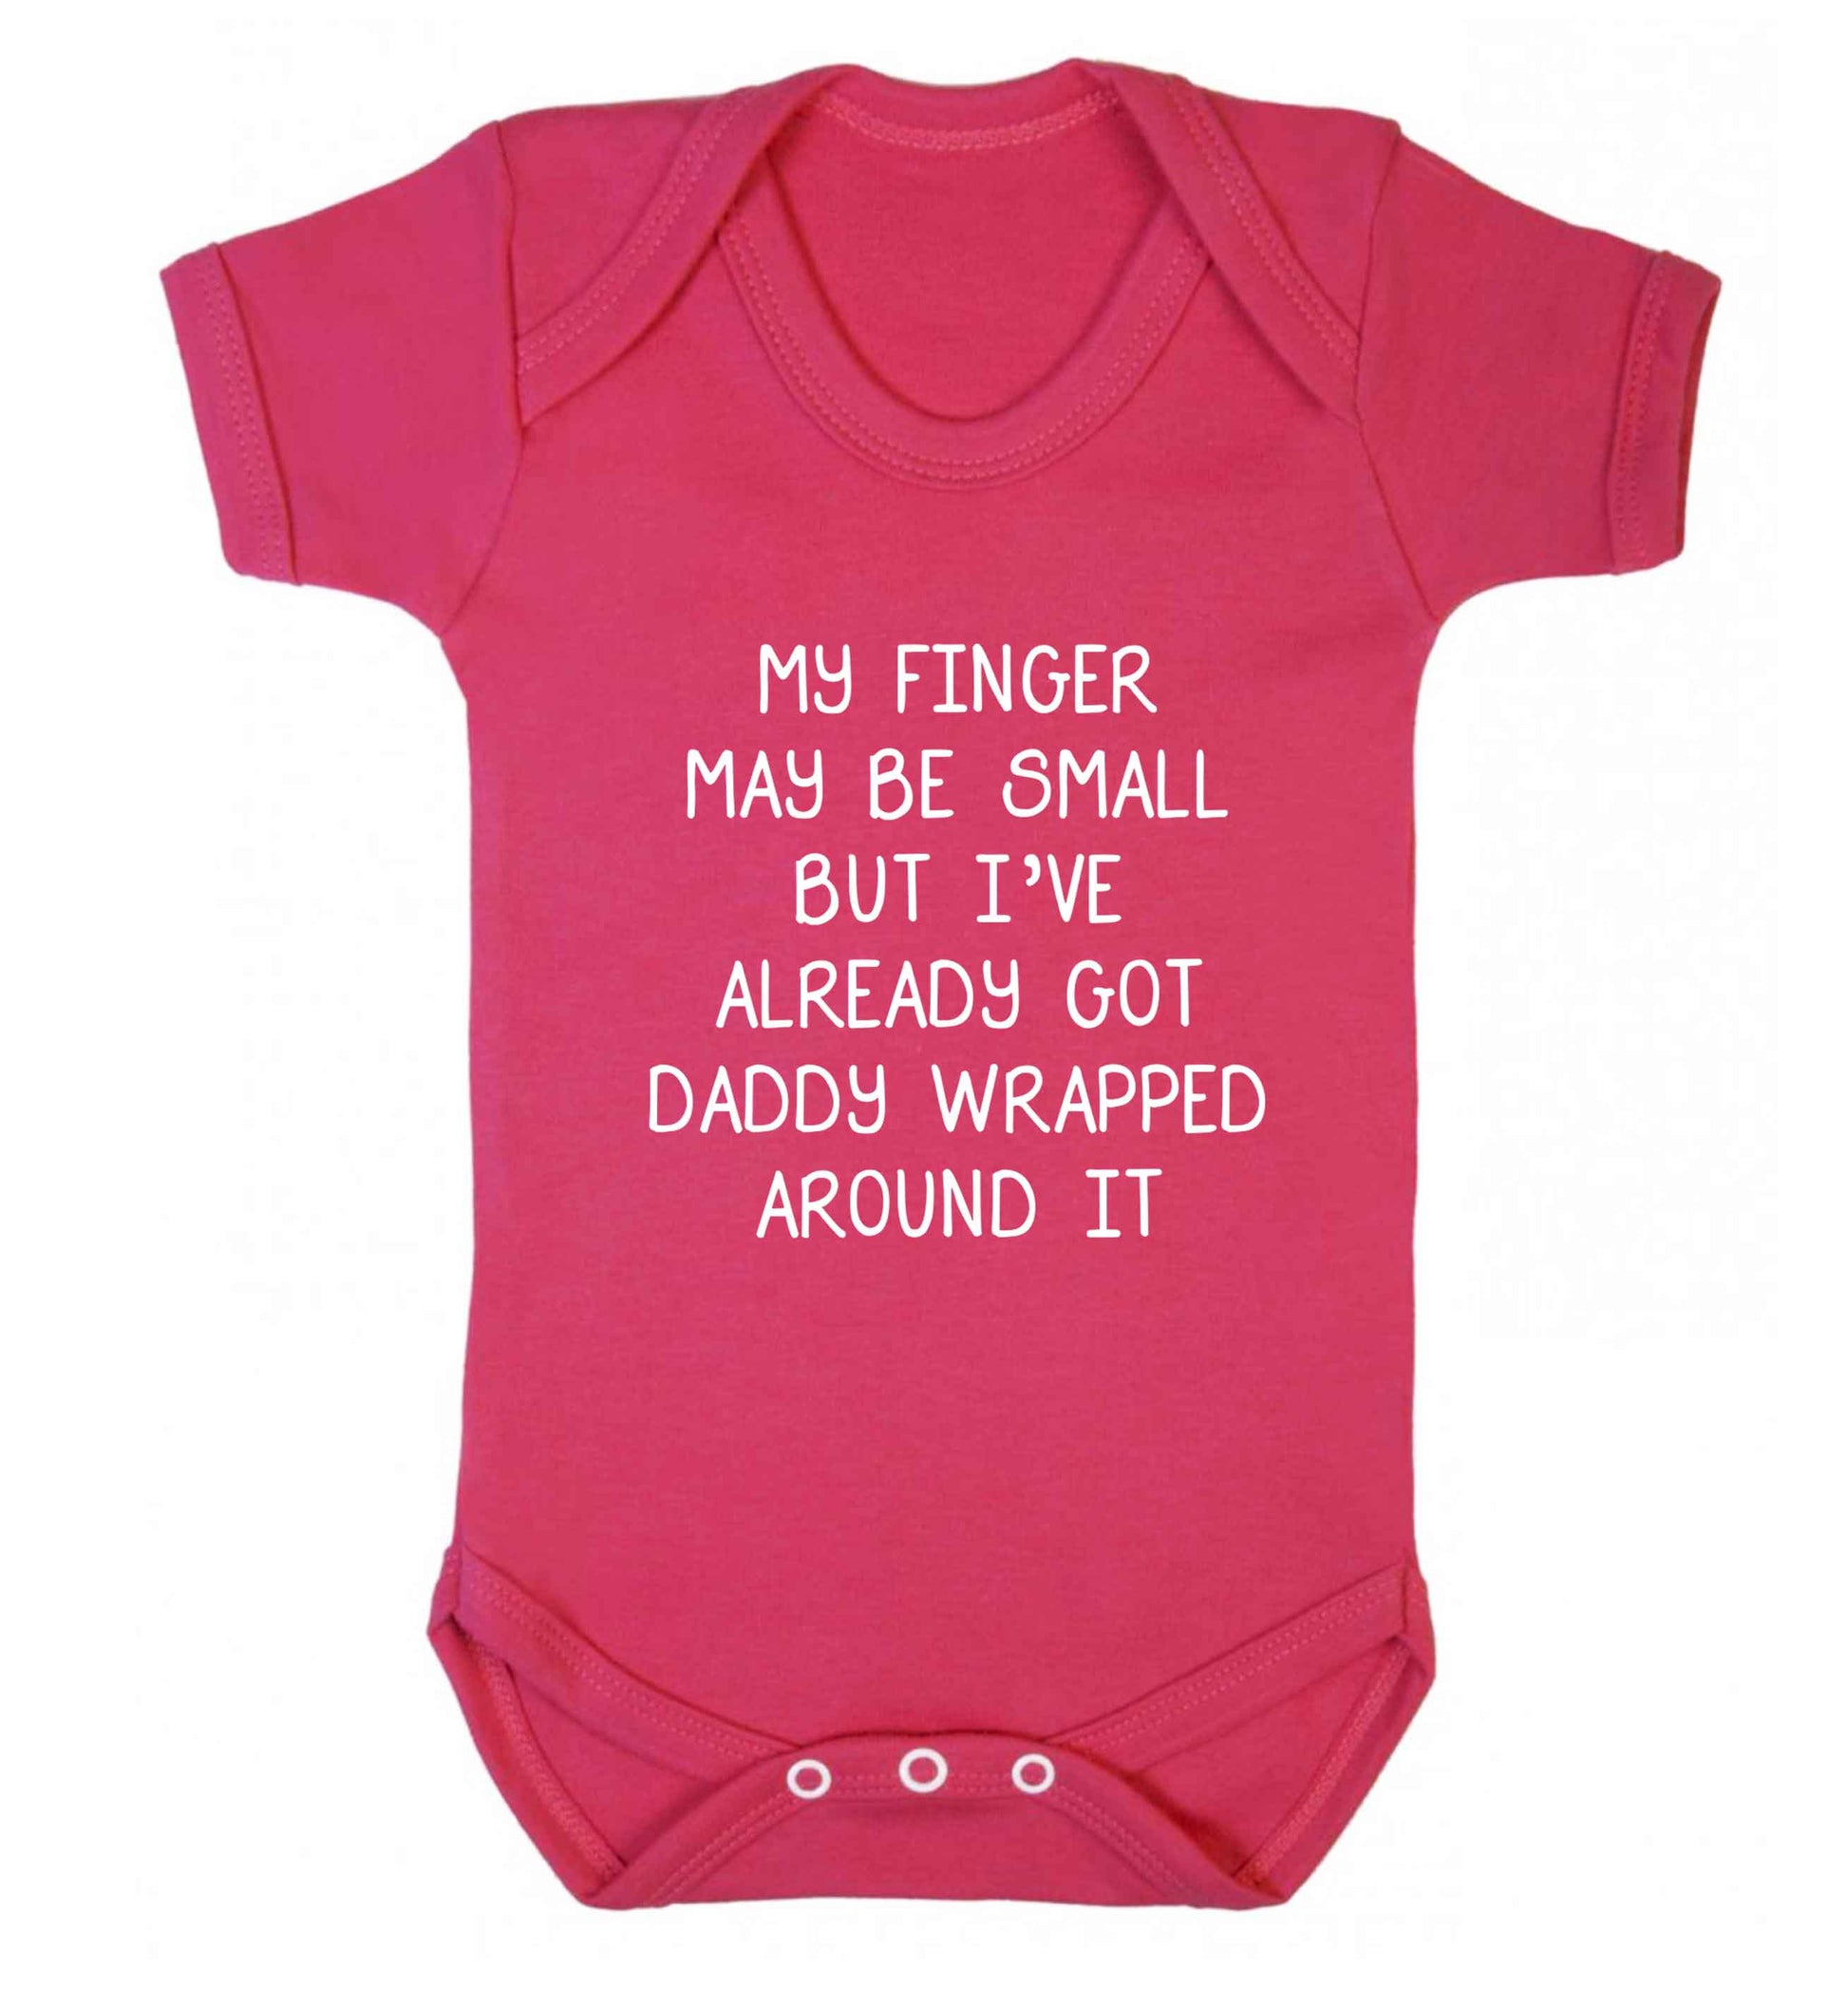 My finger may be small but I've already got daddy wrapped around it baby vest dark pink 18-24 months